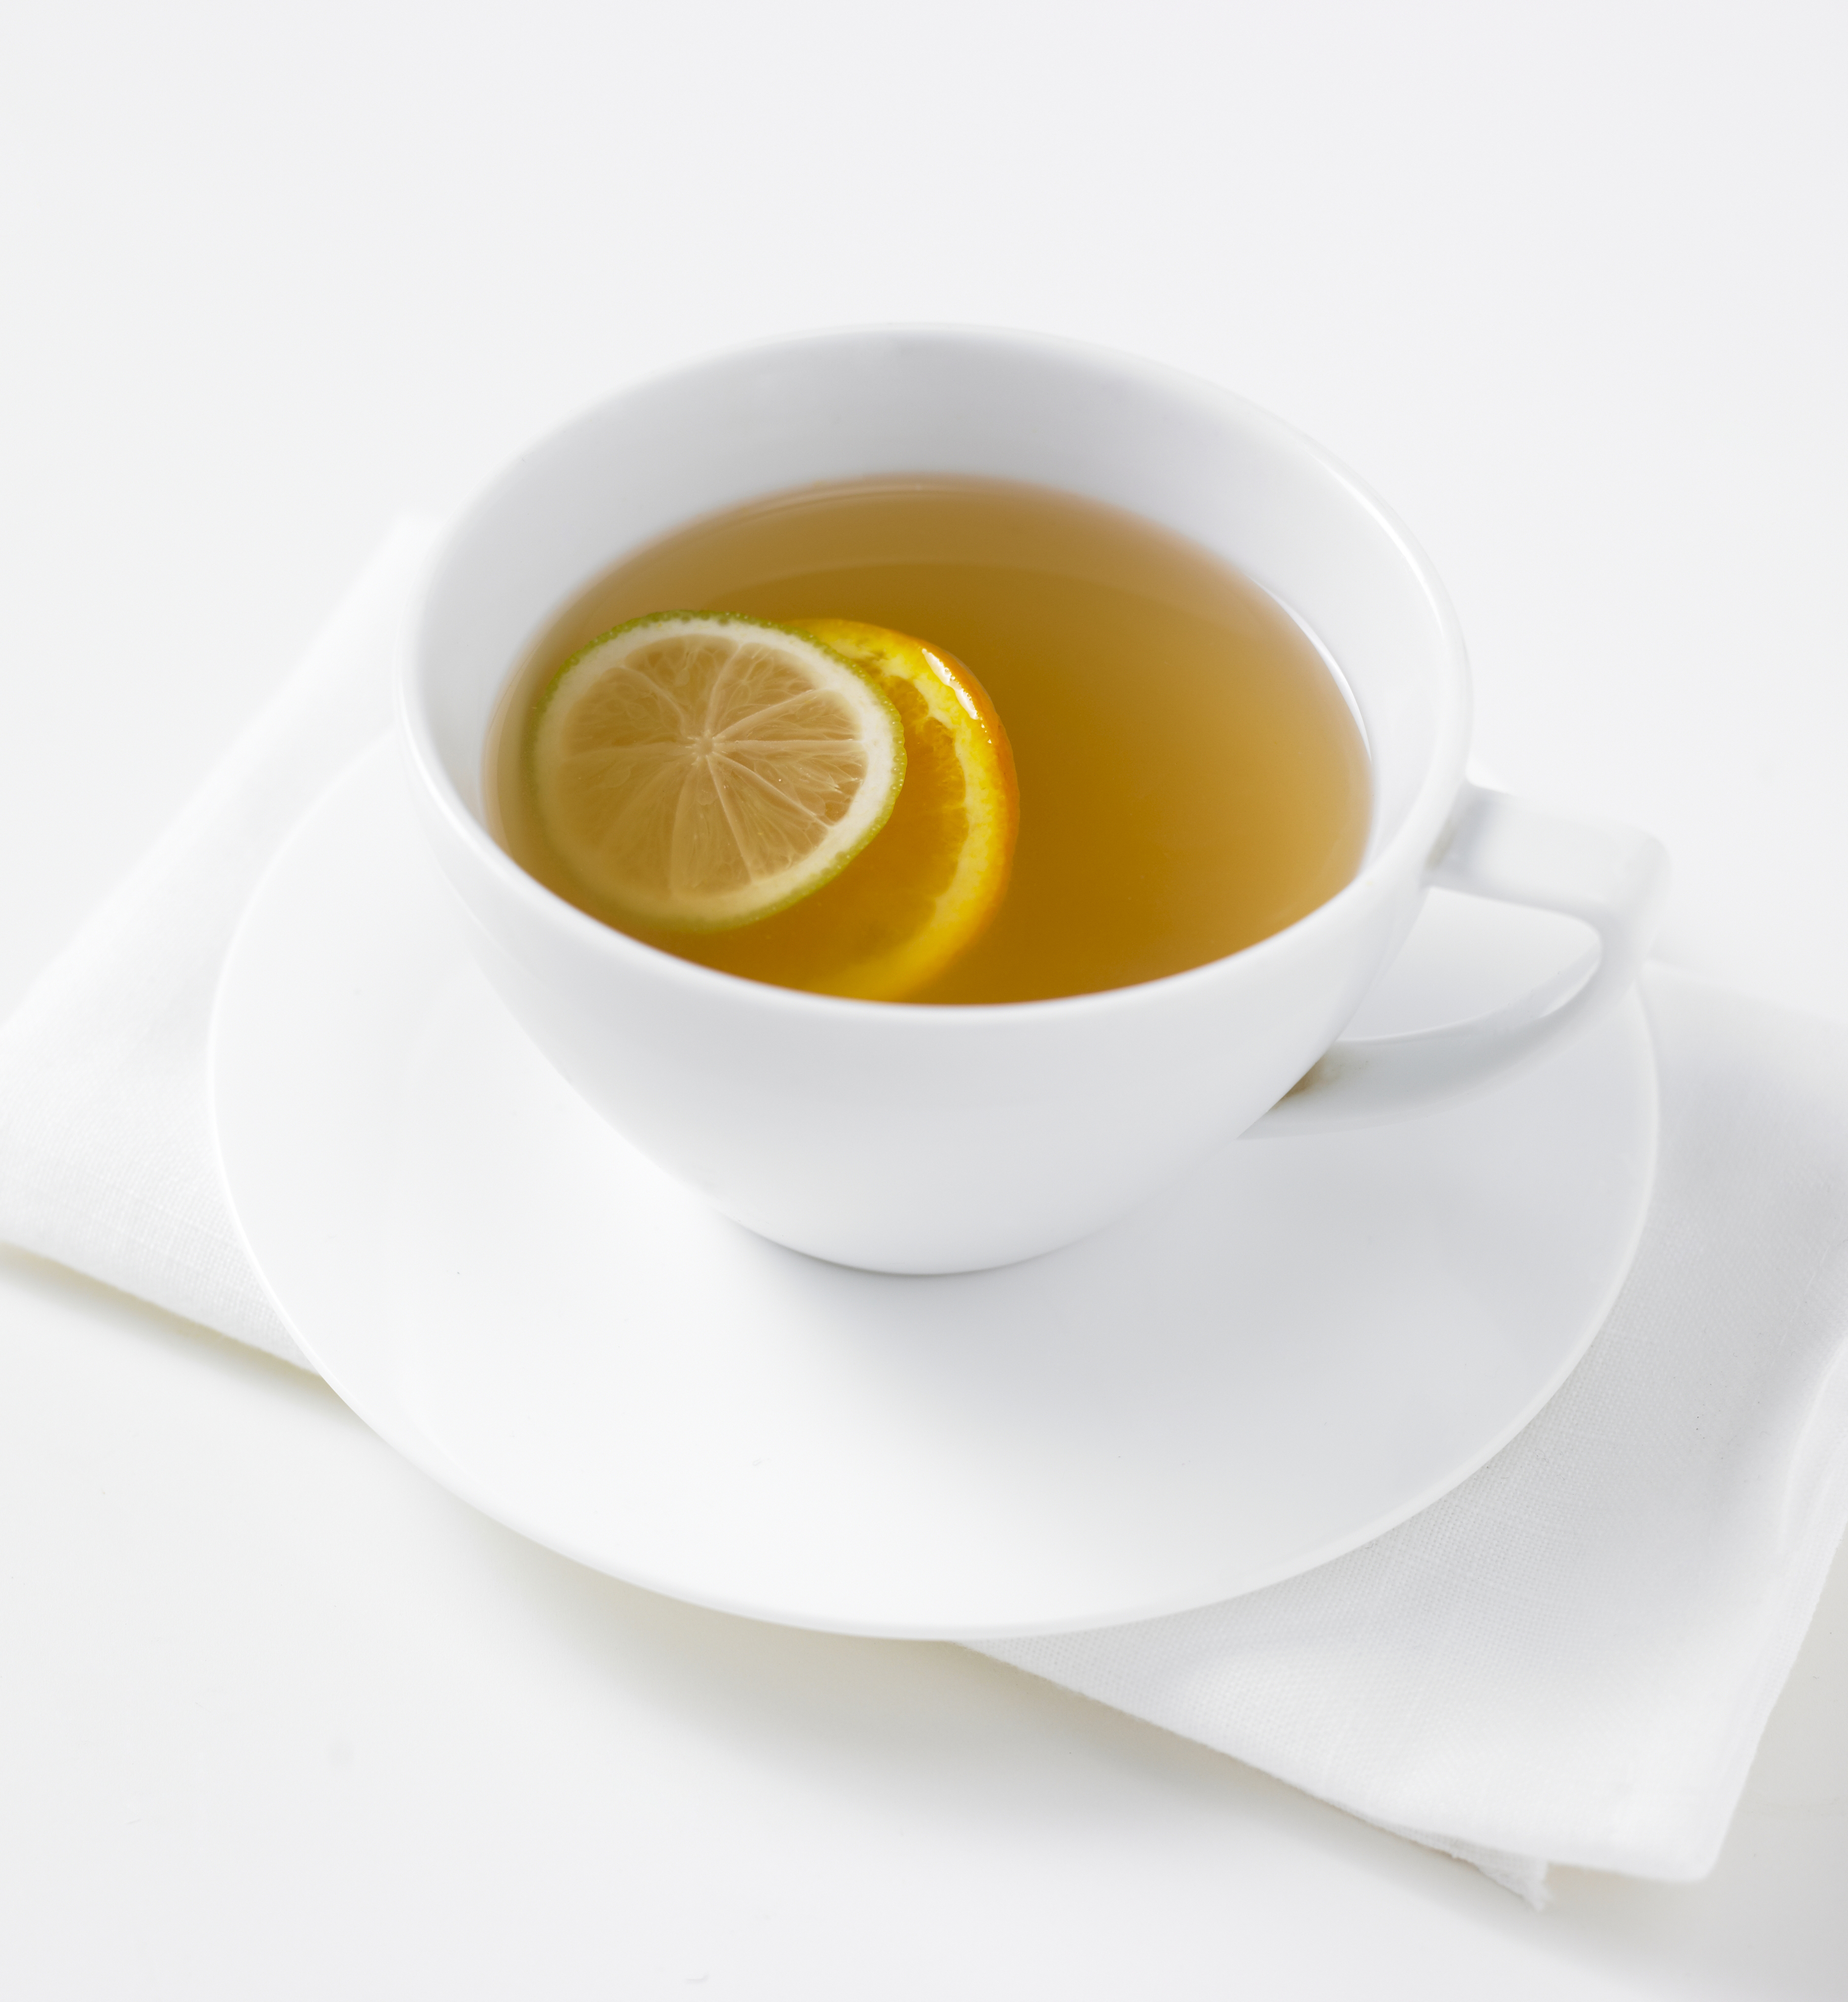 whats the best tea to drink to lose weight